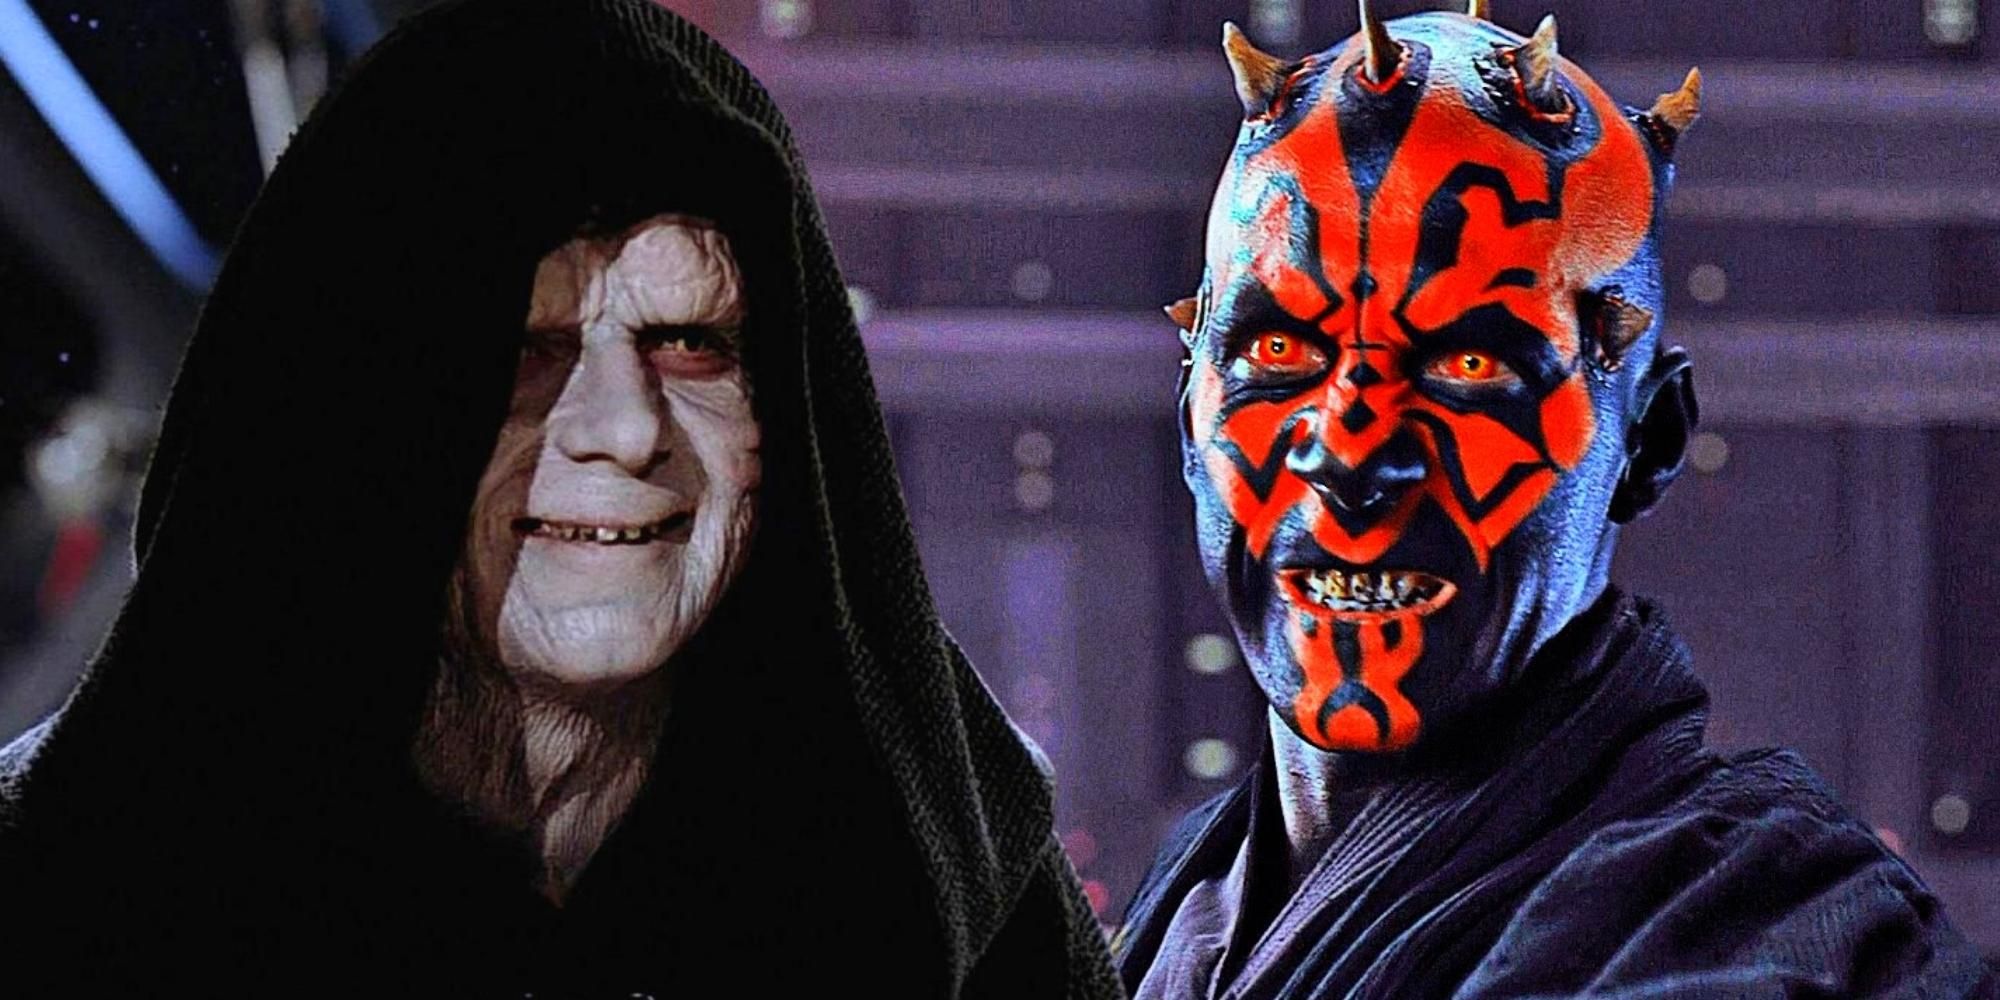 Ian McDiarmid as Emperor Palpatine and Ray Park as Darth Maul in Star Wars.